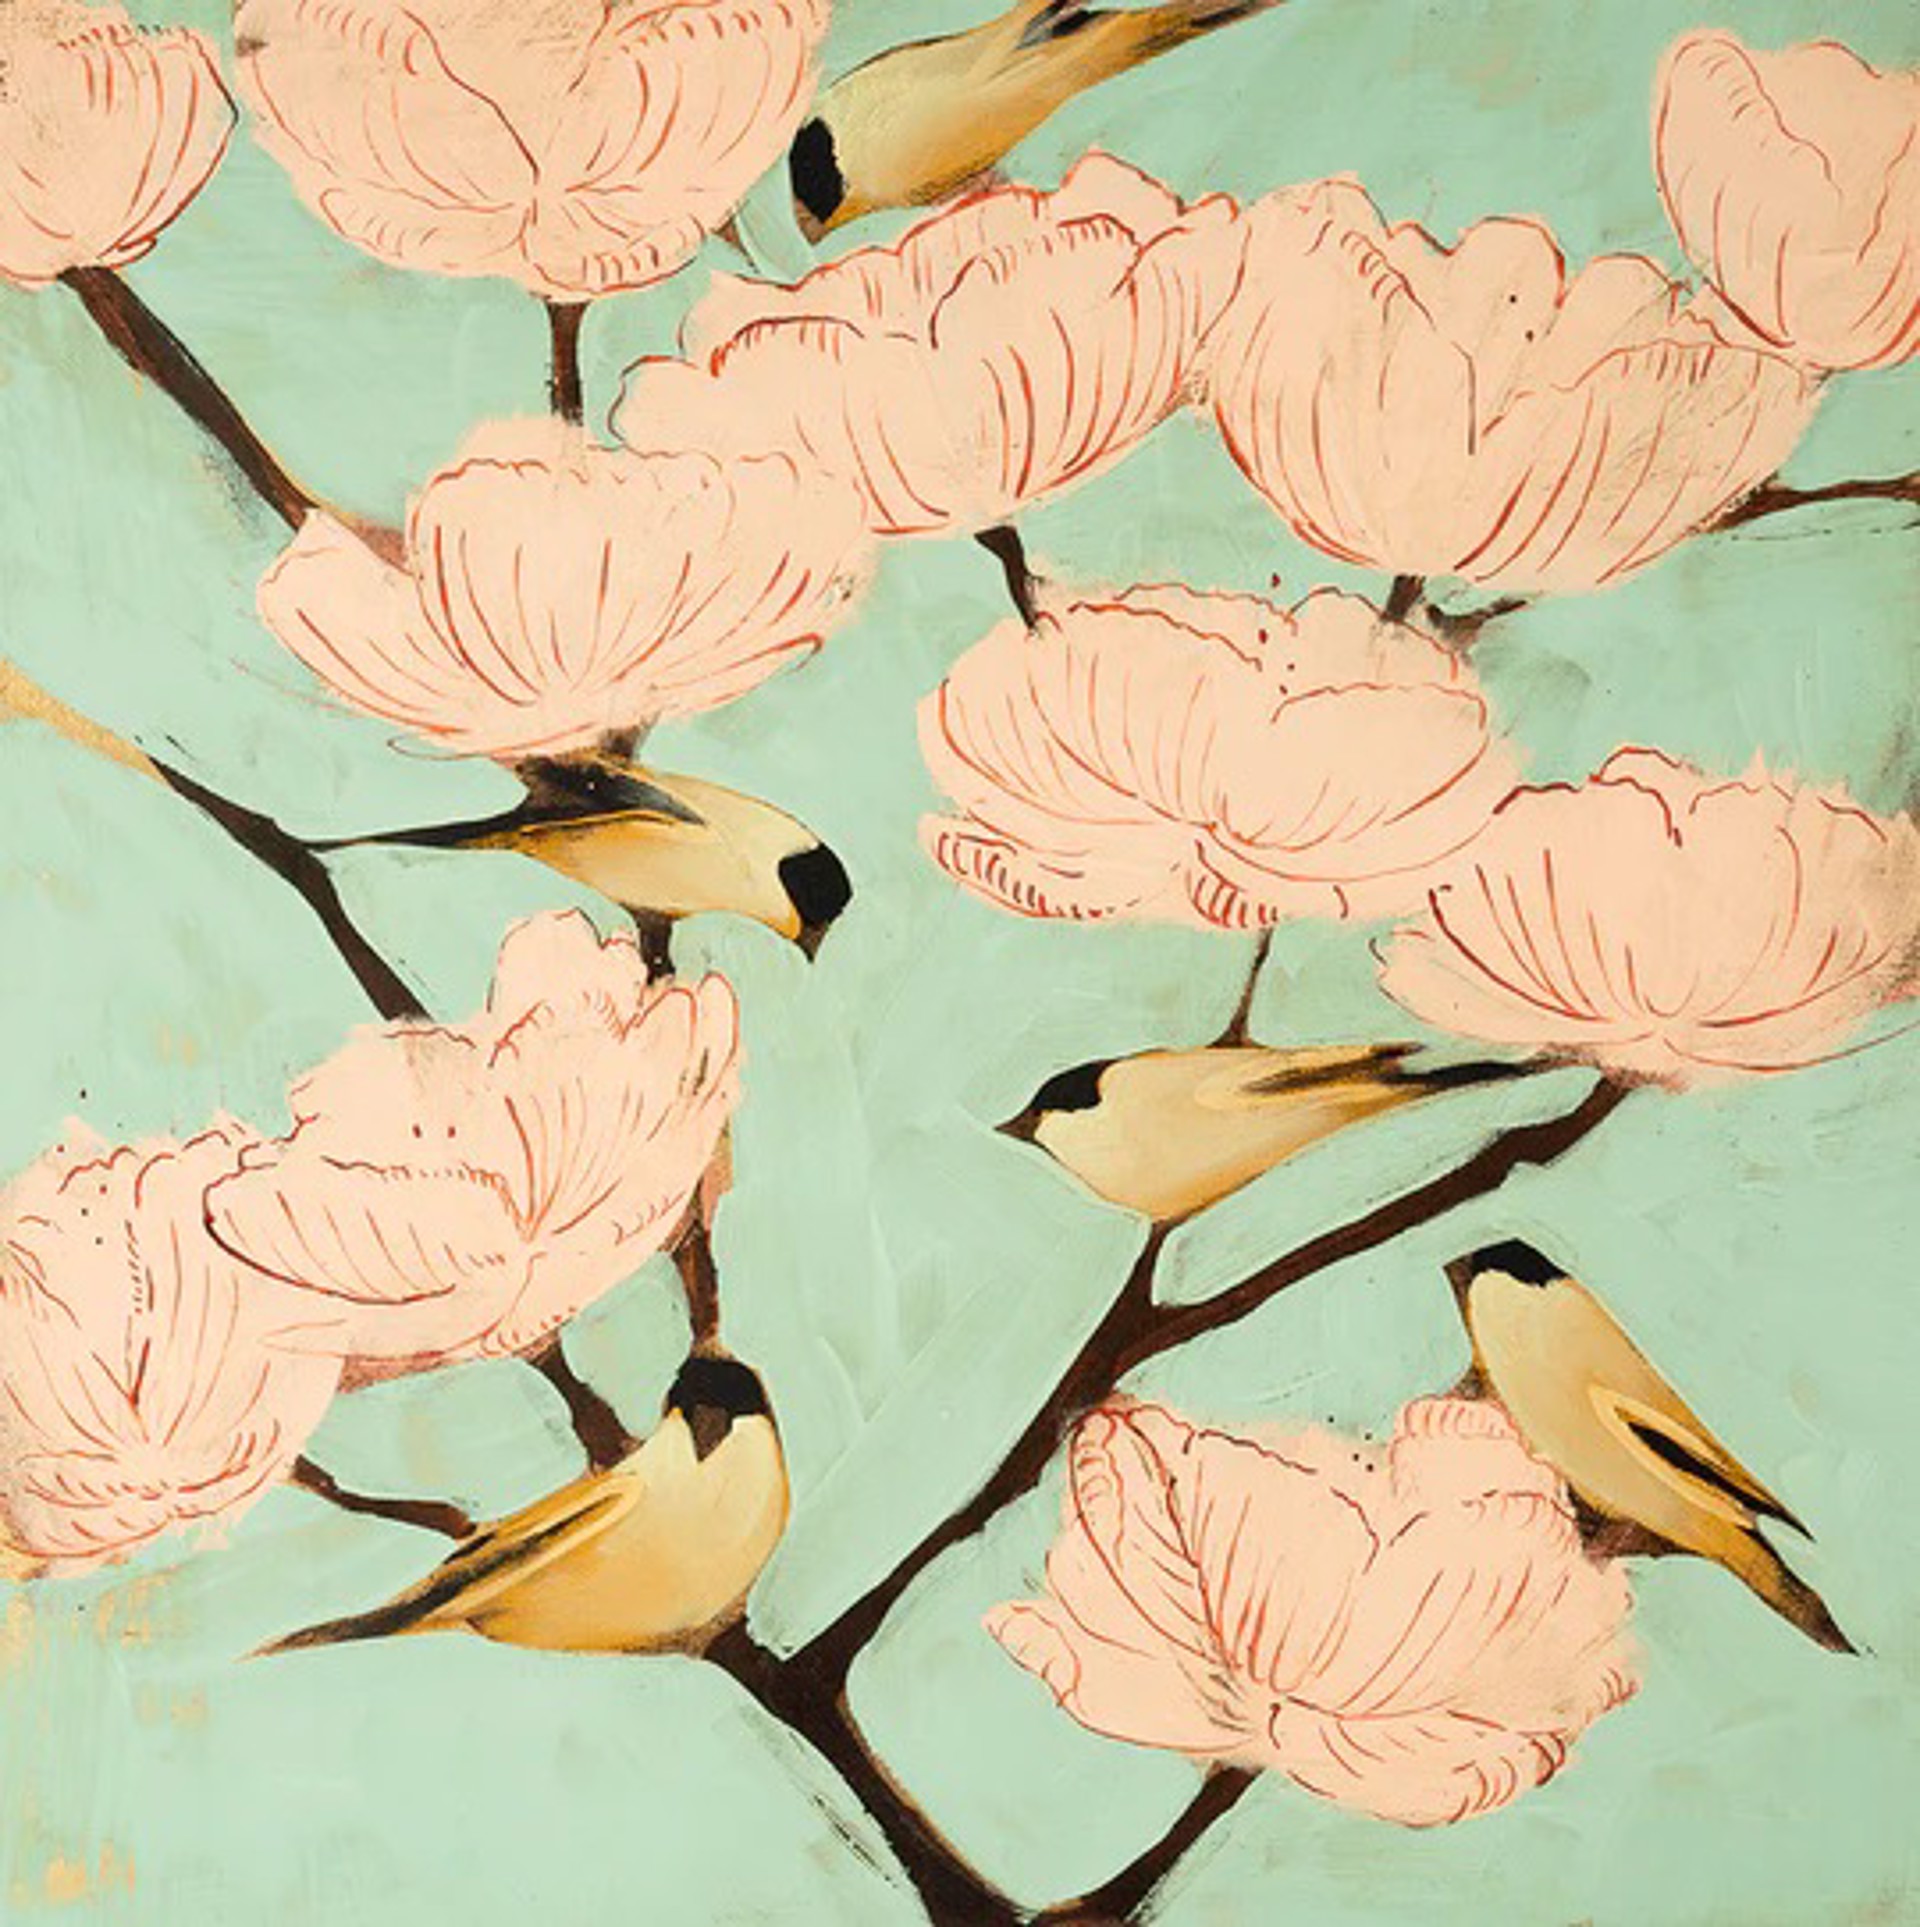 Blossoms & Finches by Joseph Bradley